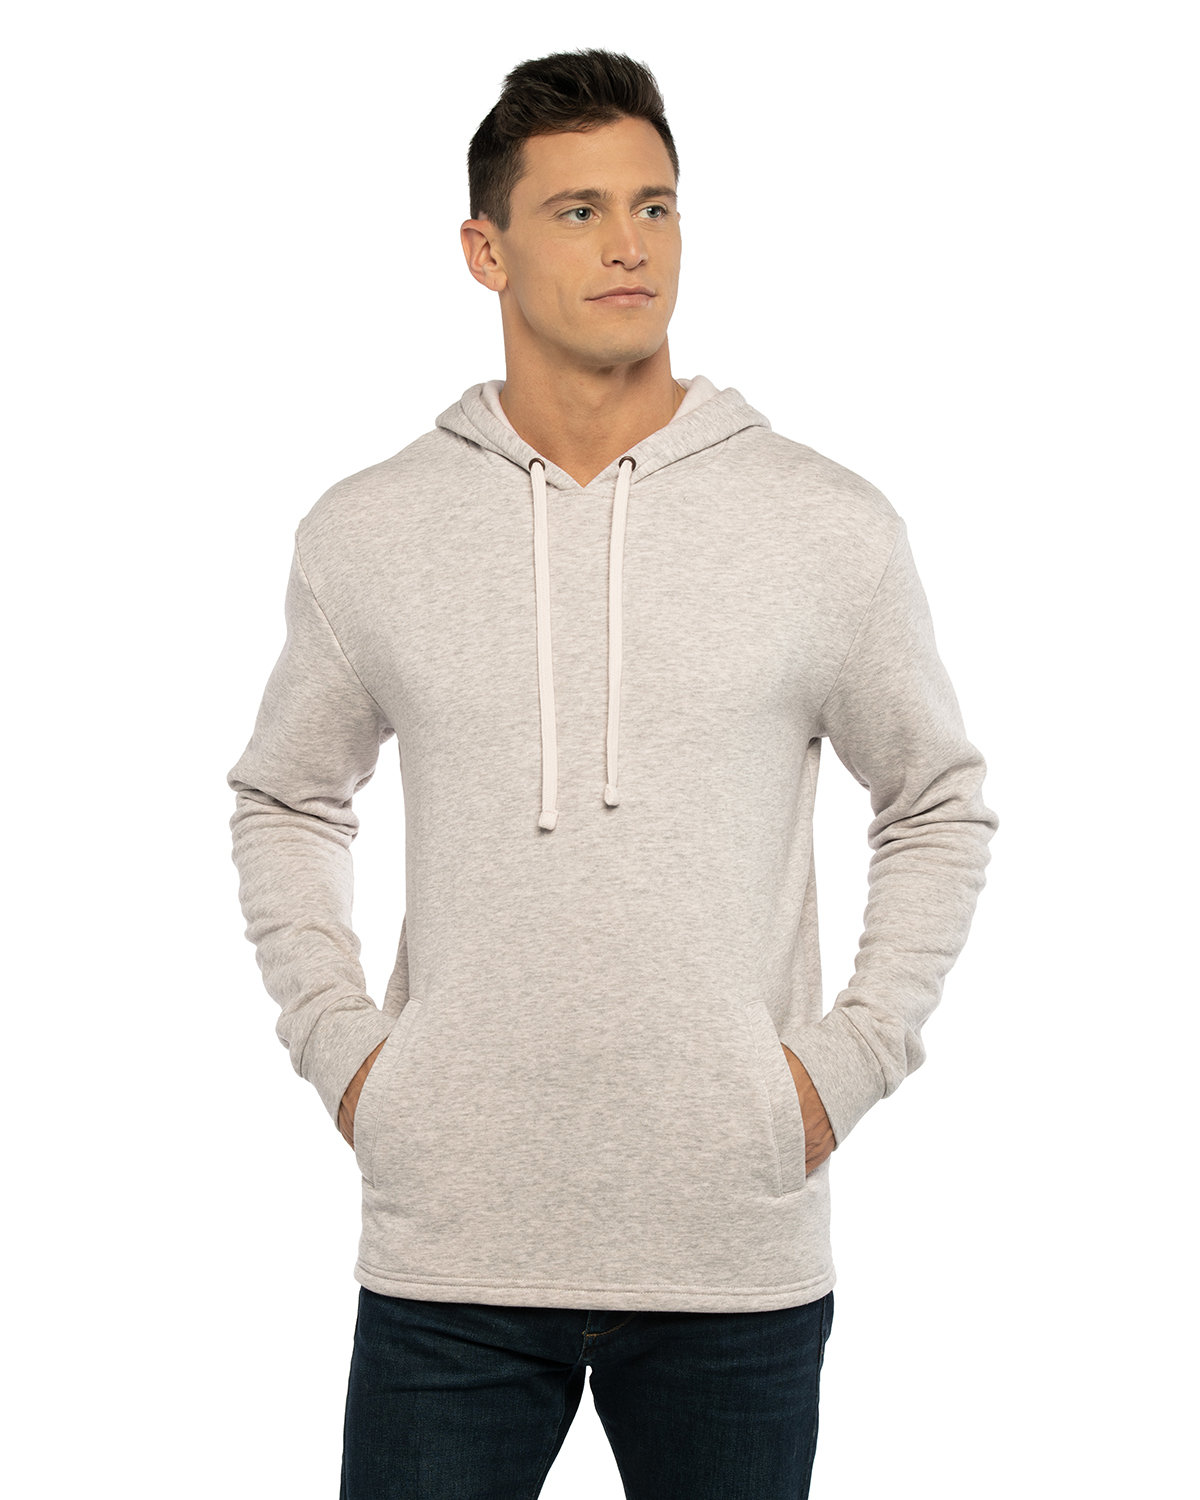 Next Level Apparel Adult PCH Pullover Hoodie oatmeal 